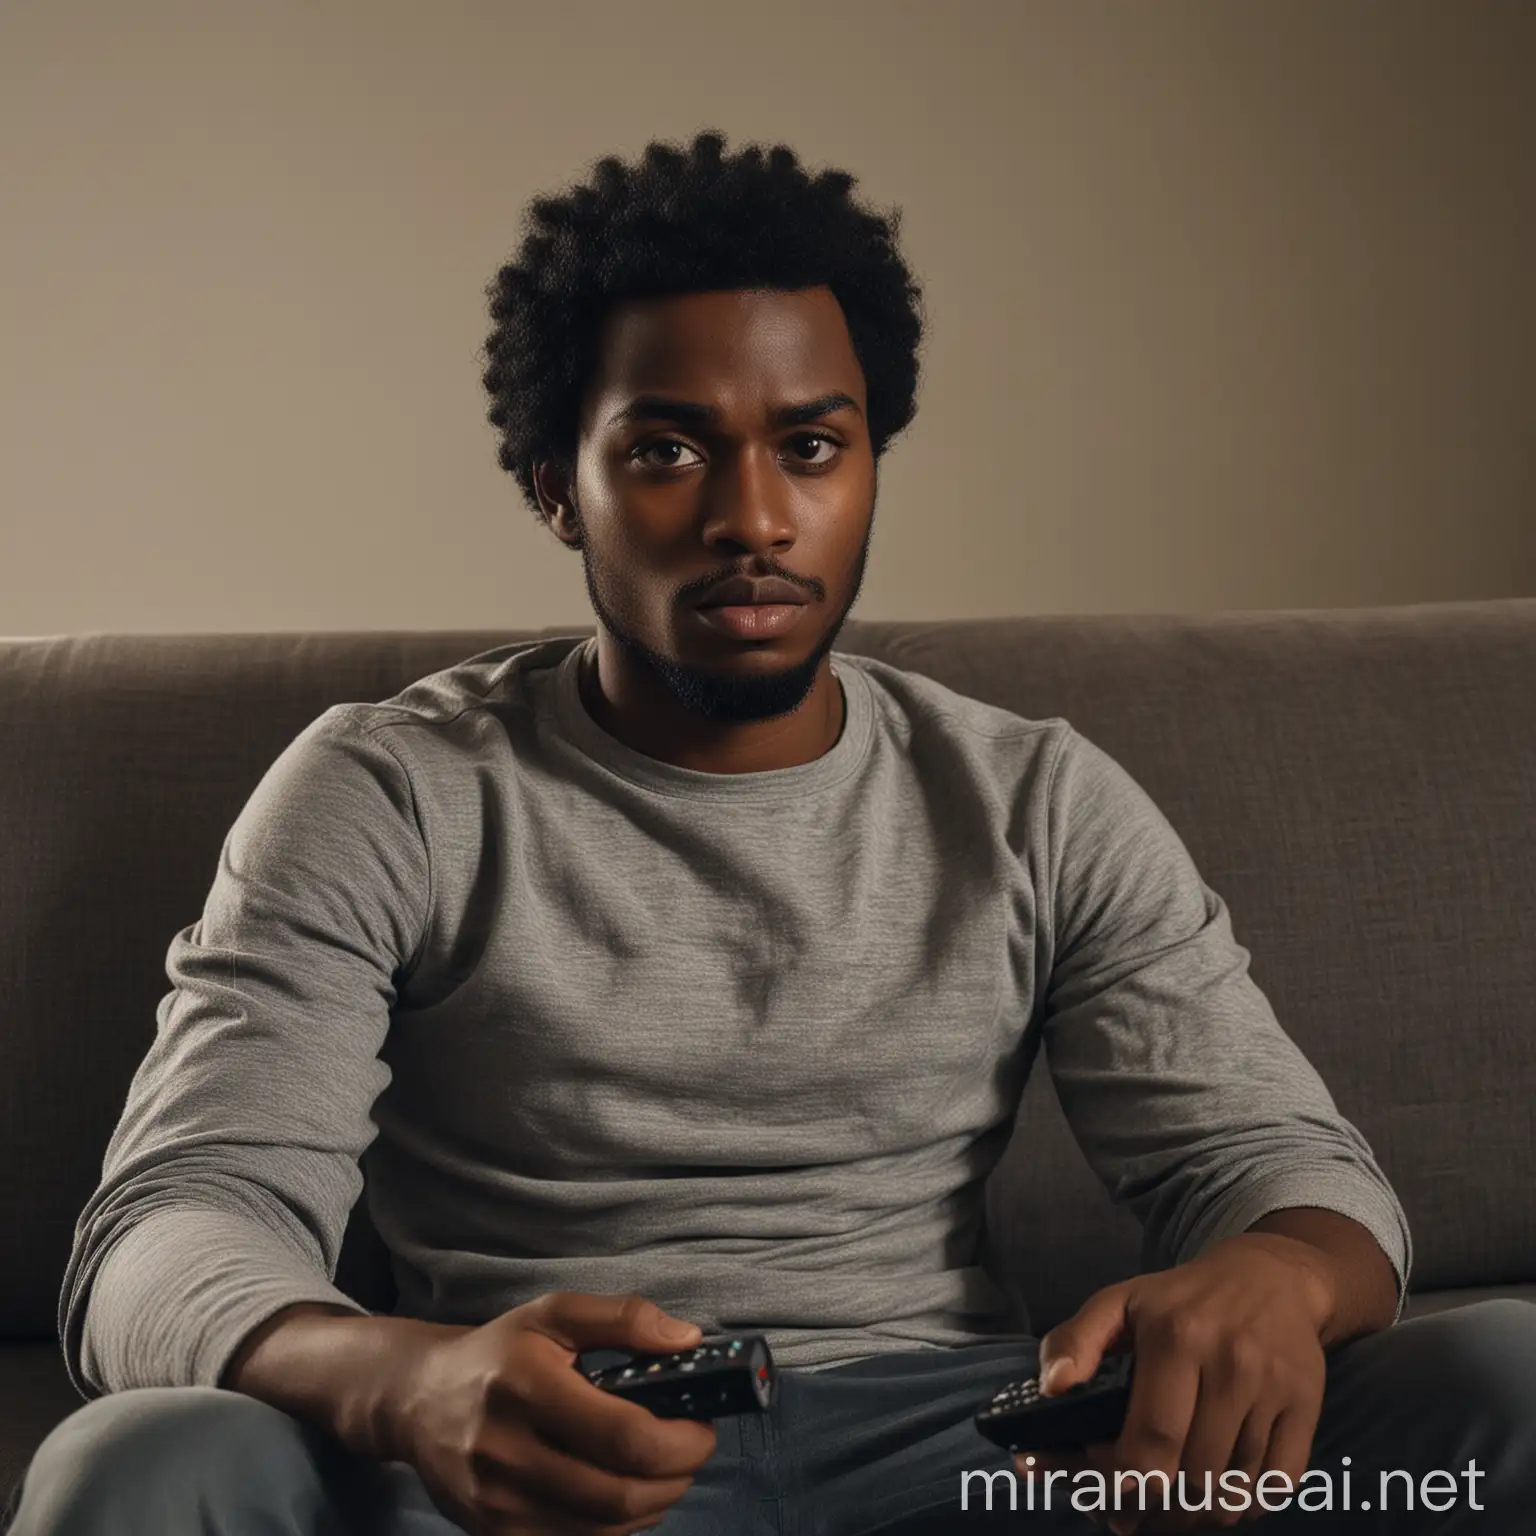 there is a man sitting on a couch with a remote in his hand, riyahd cassiem, man is with black skin, with serious face expression, portrait shot 8 k, mkbhd, very very low quality picture, high quality portrait, looking straight to camera, low quality photograph, photo of a man, serious focussed look, serious and stern expression